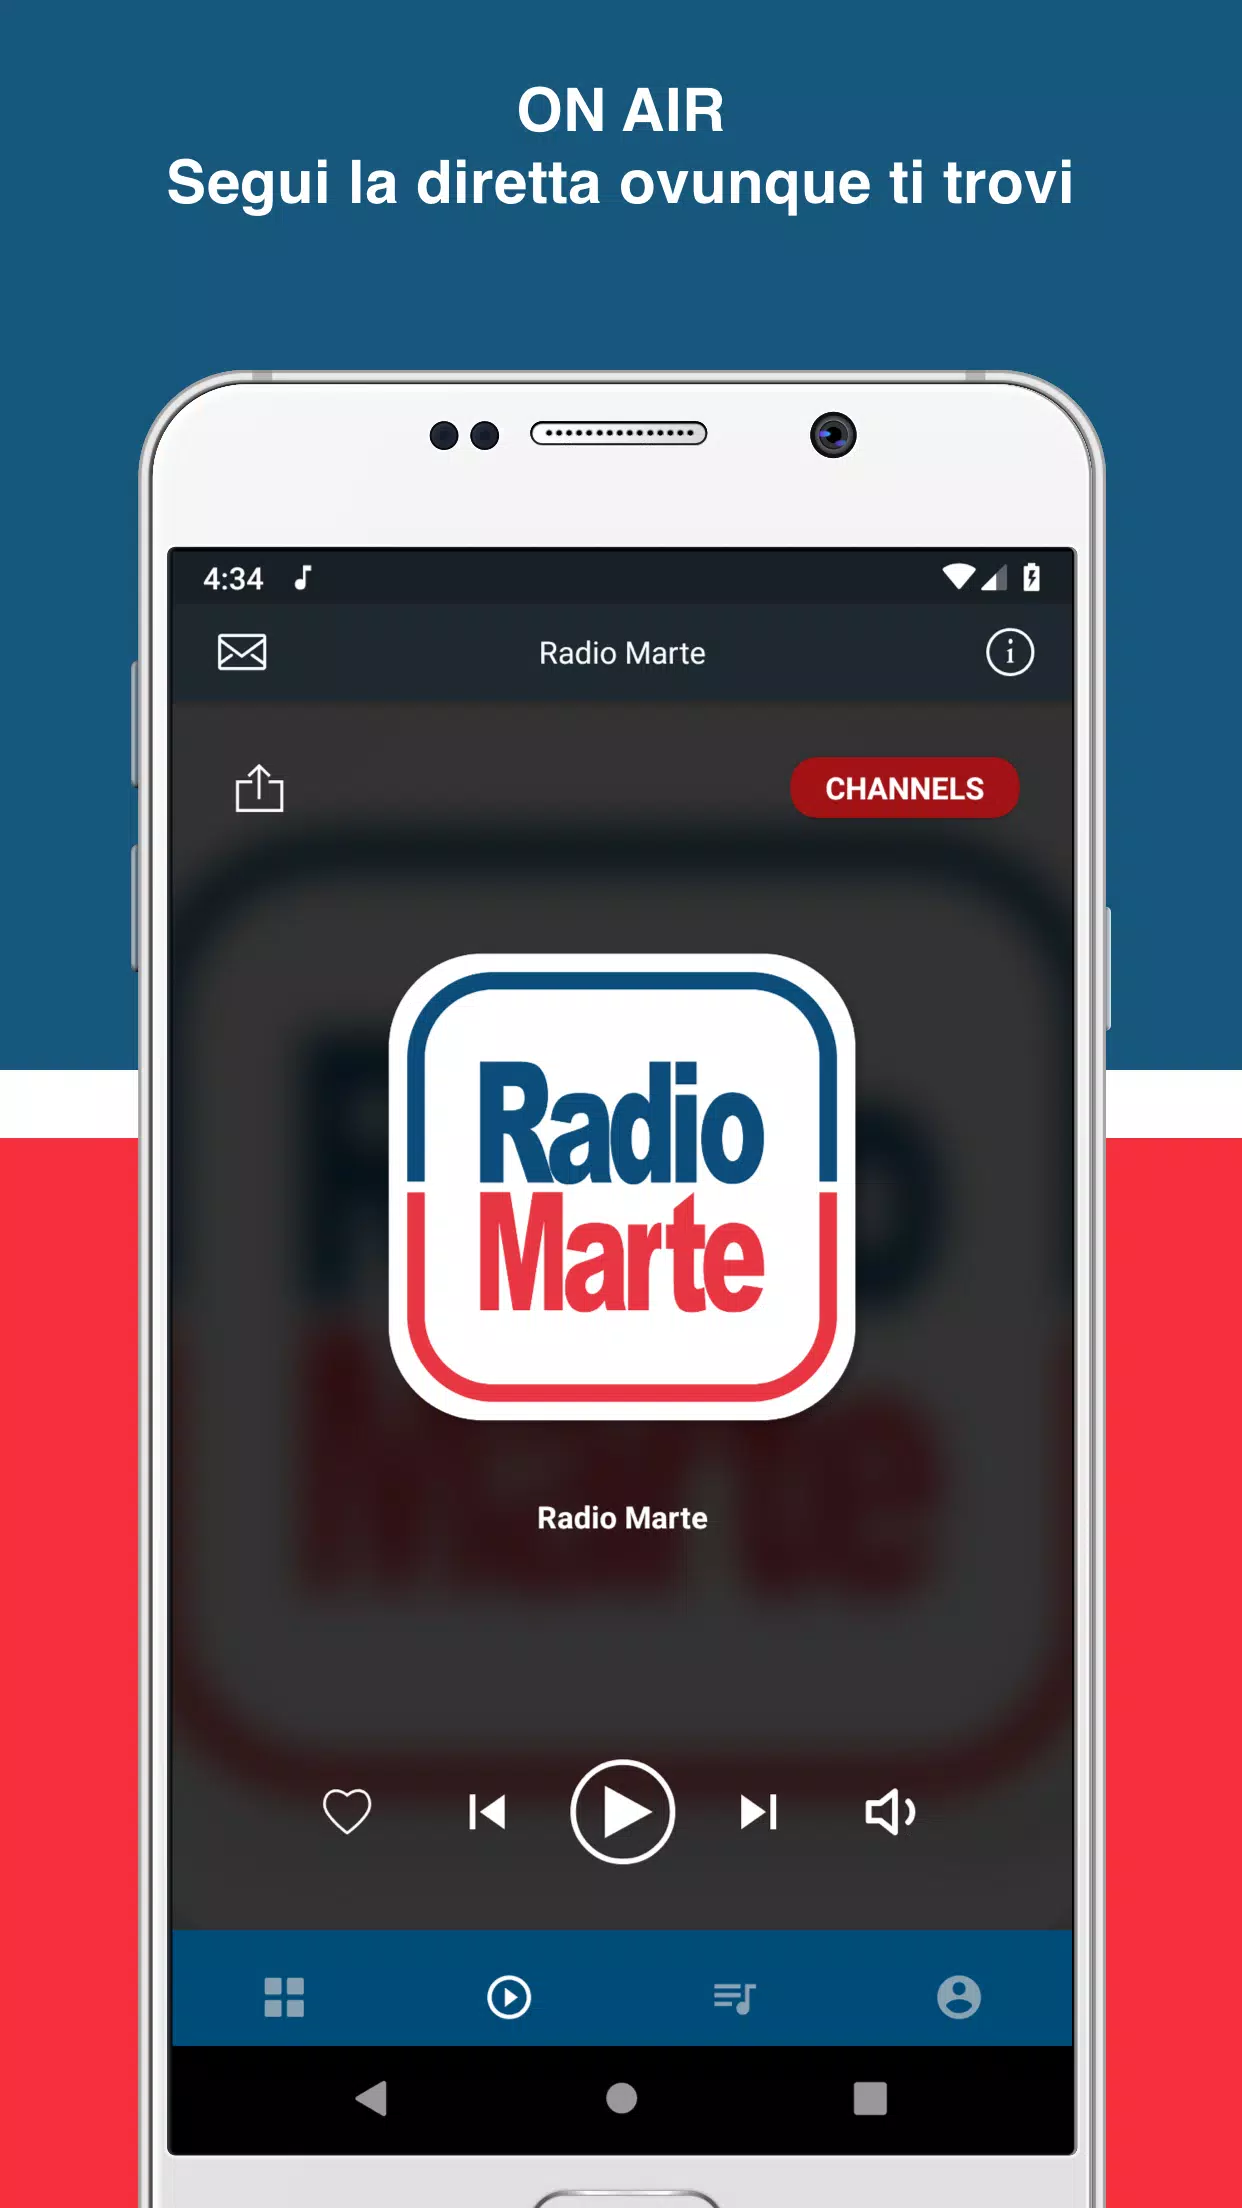 Radio Marte for Android - APK Download